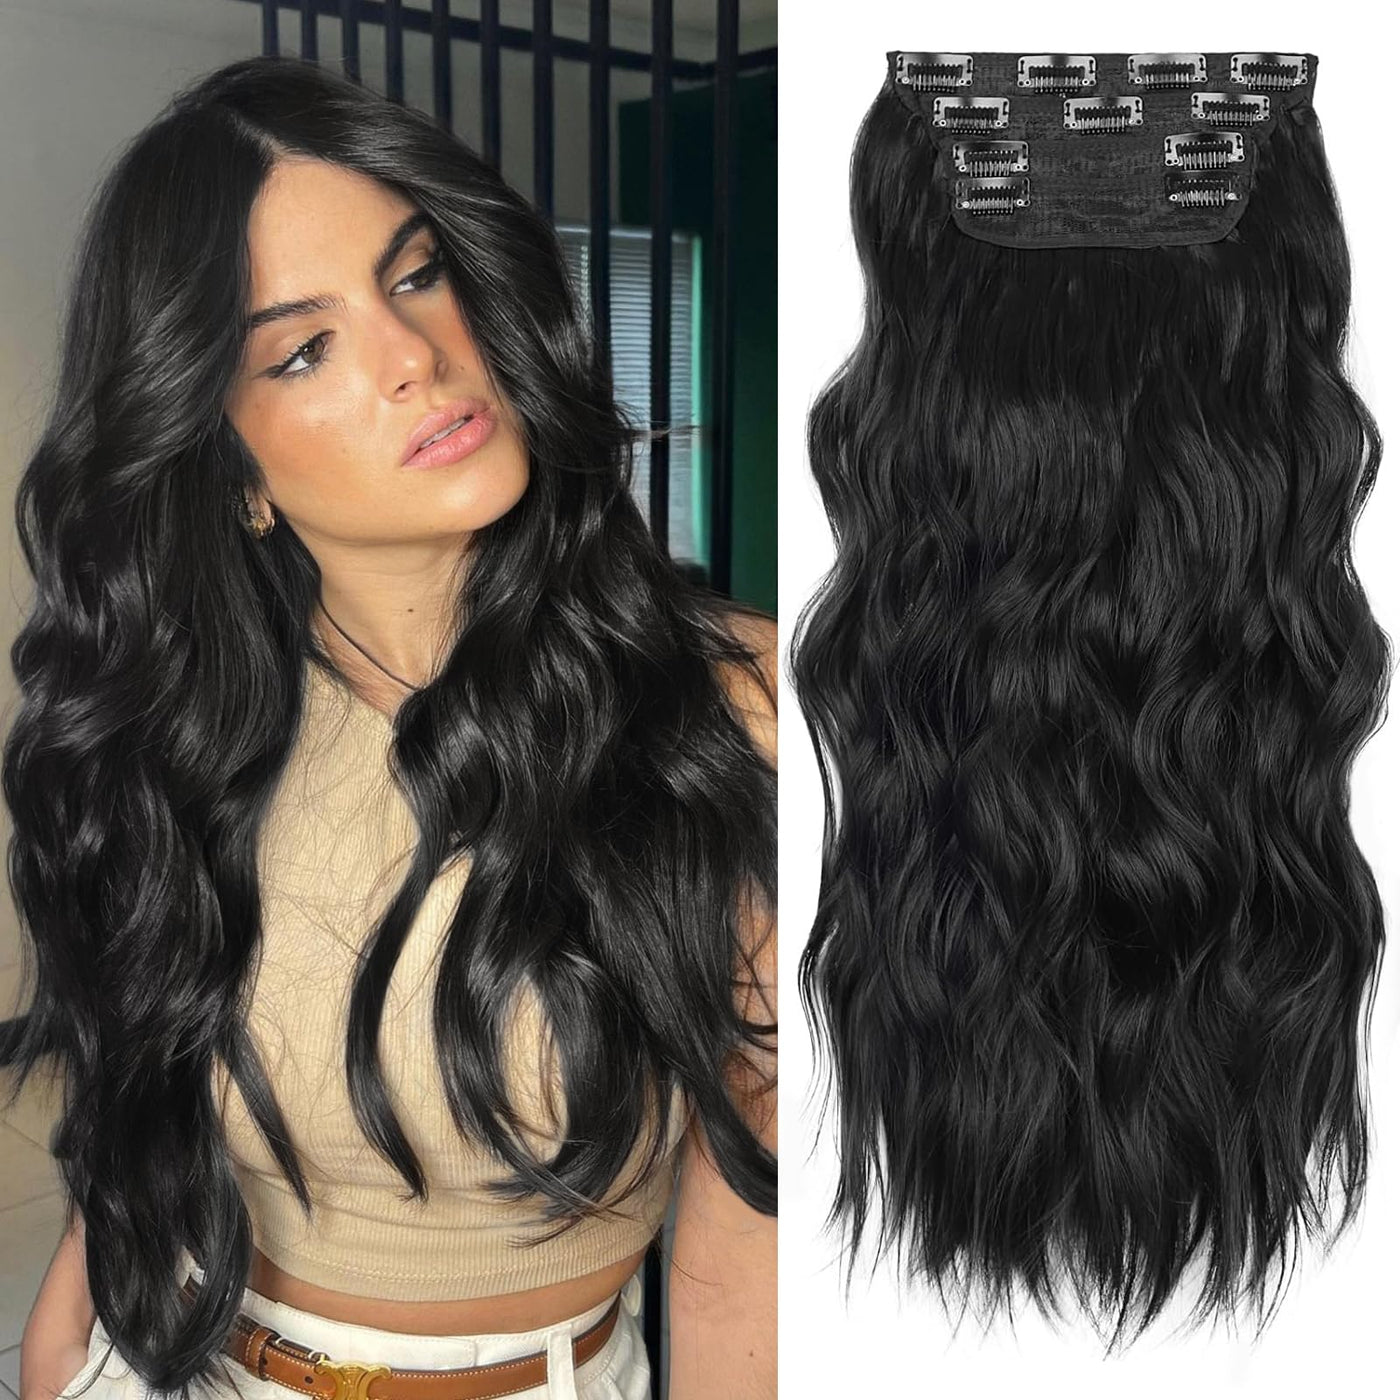 CloudEase Clip in Hair Extension Long Wavy Hair Extensions 20 Inch Black 4PCS Thick Hairpieces for Women